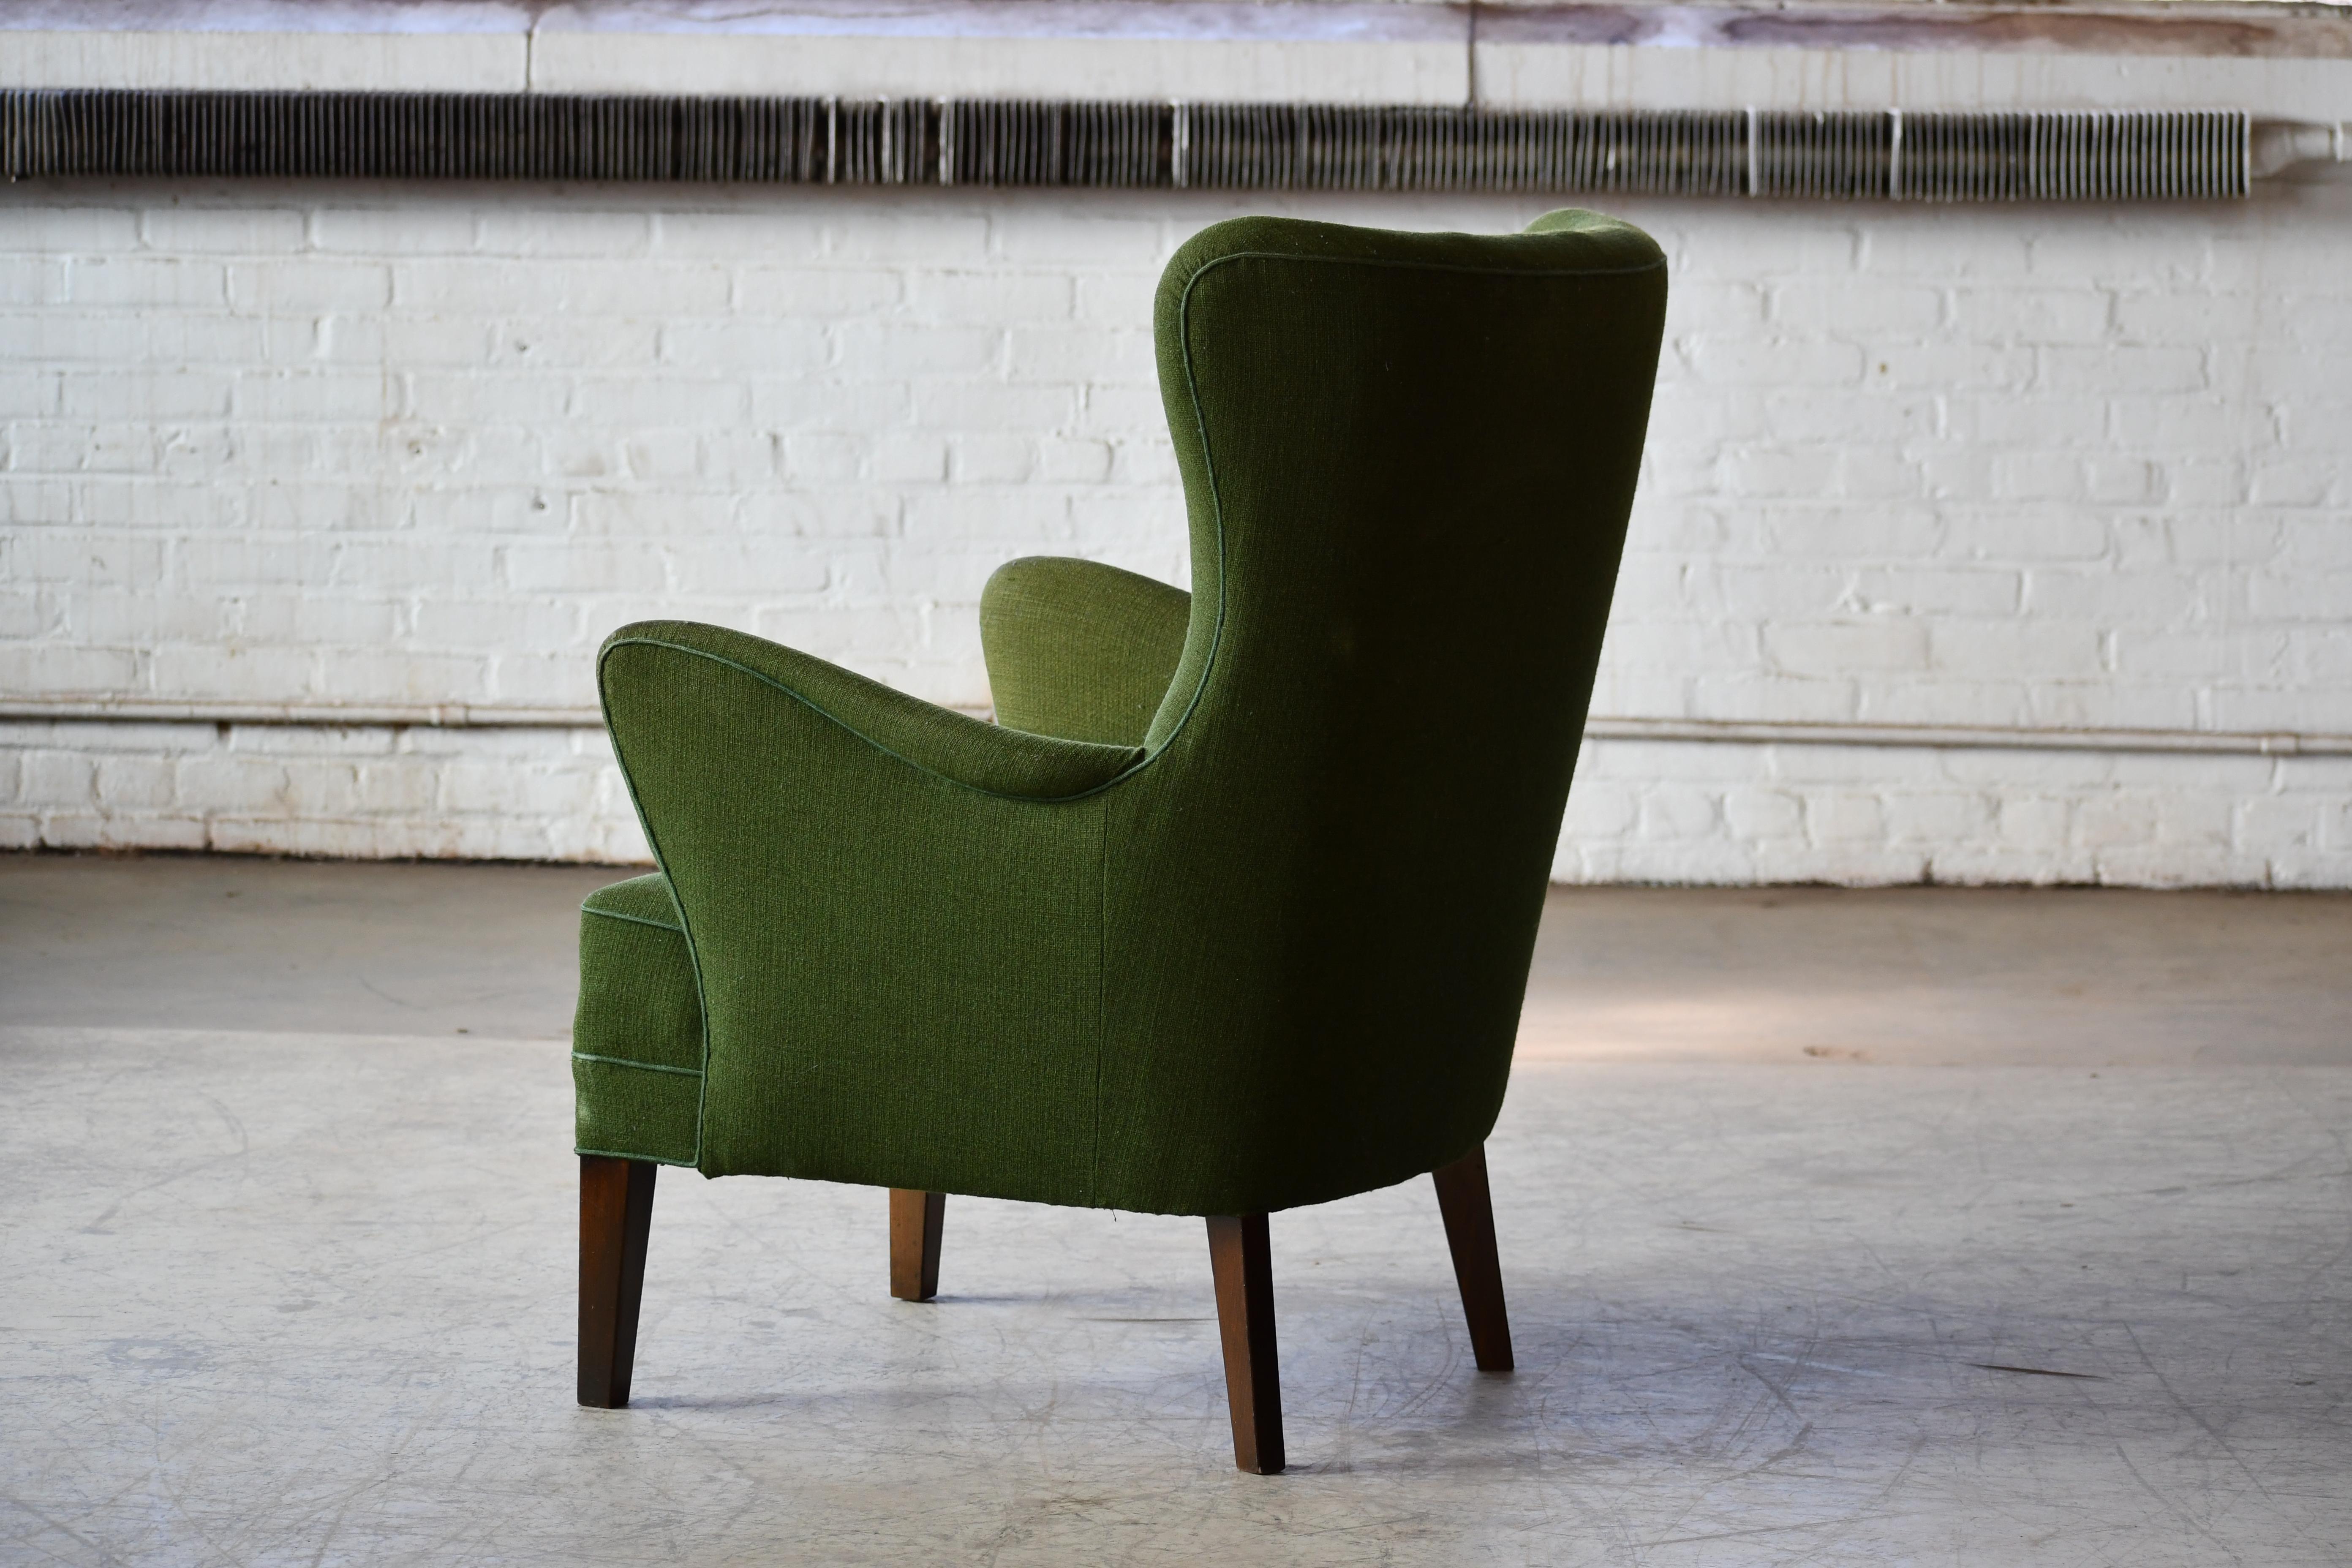 Mid-20th Century Danish 1940s Lassen Style Easy Chair in Green Wool Fabric Mahogany Legs For Sale